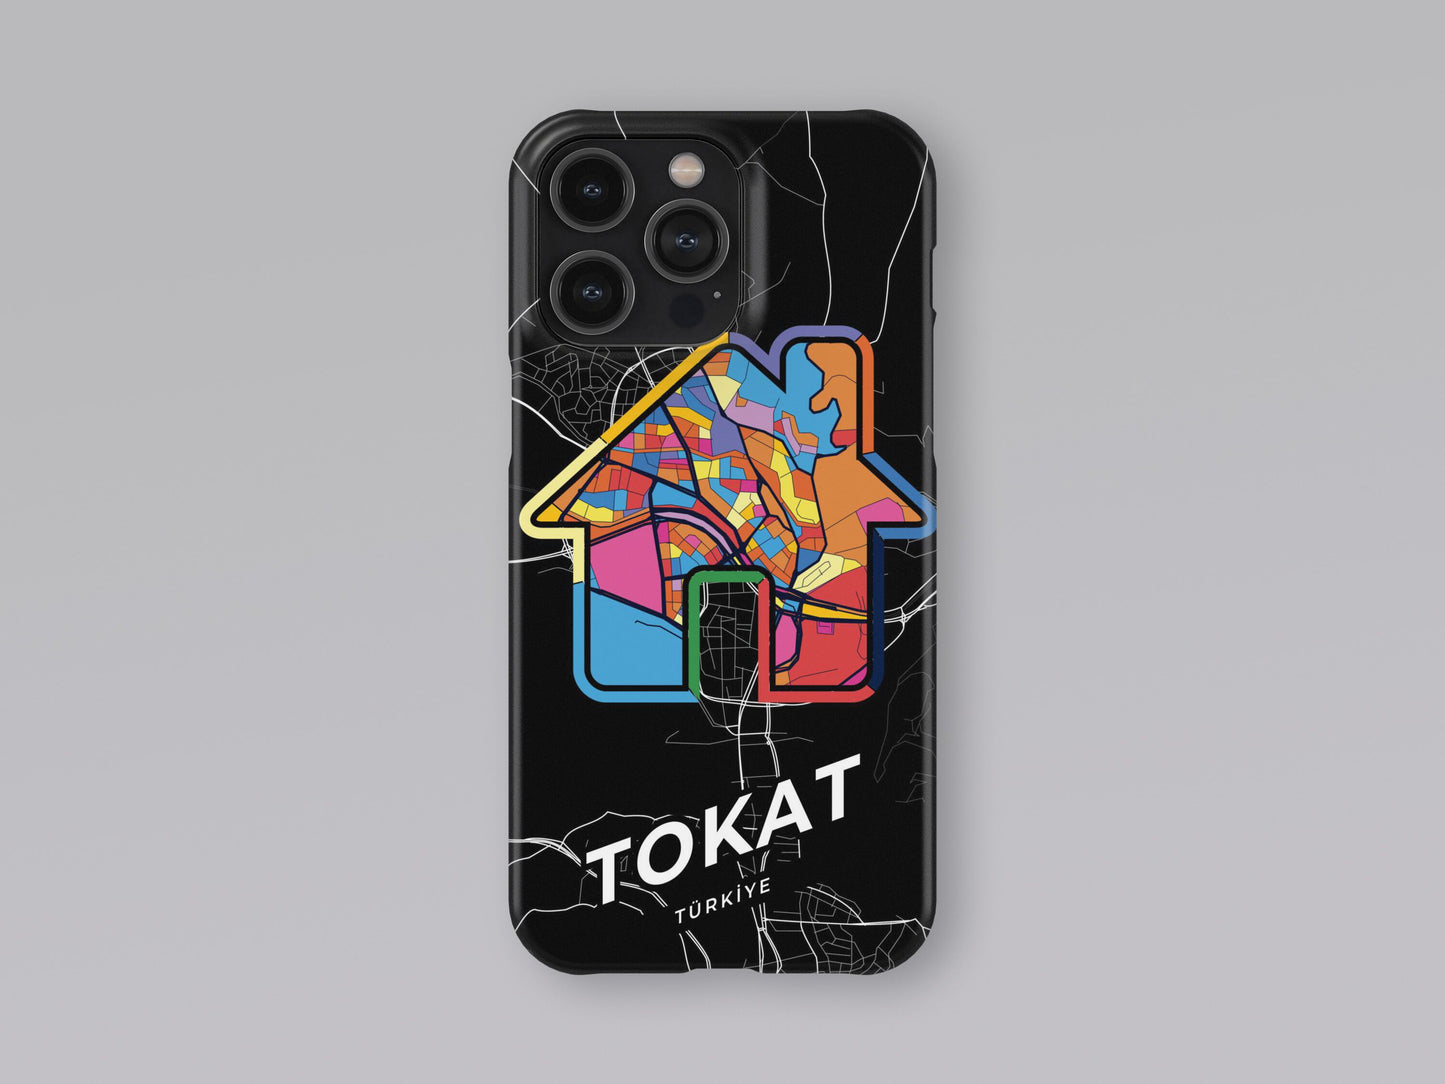 Tokat Turkey slim phone case with colorful icon 3